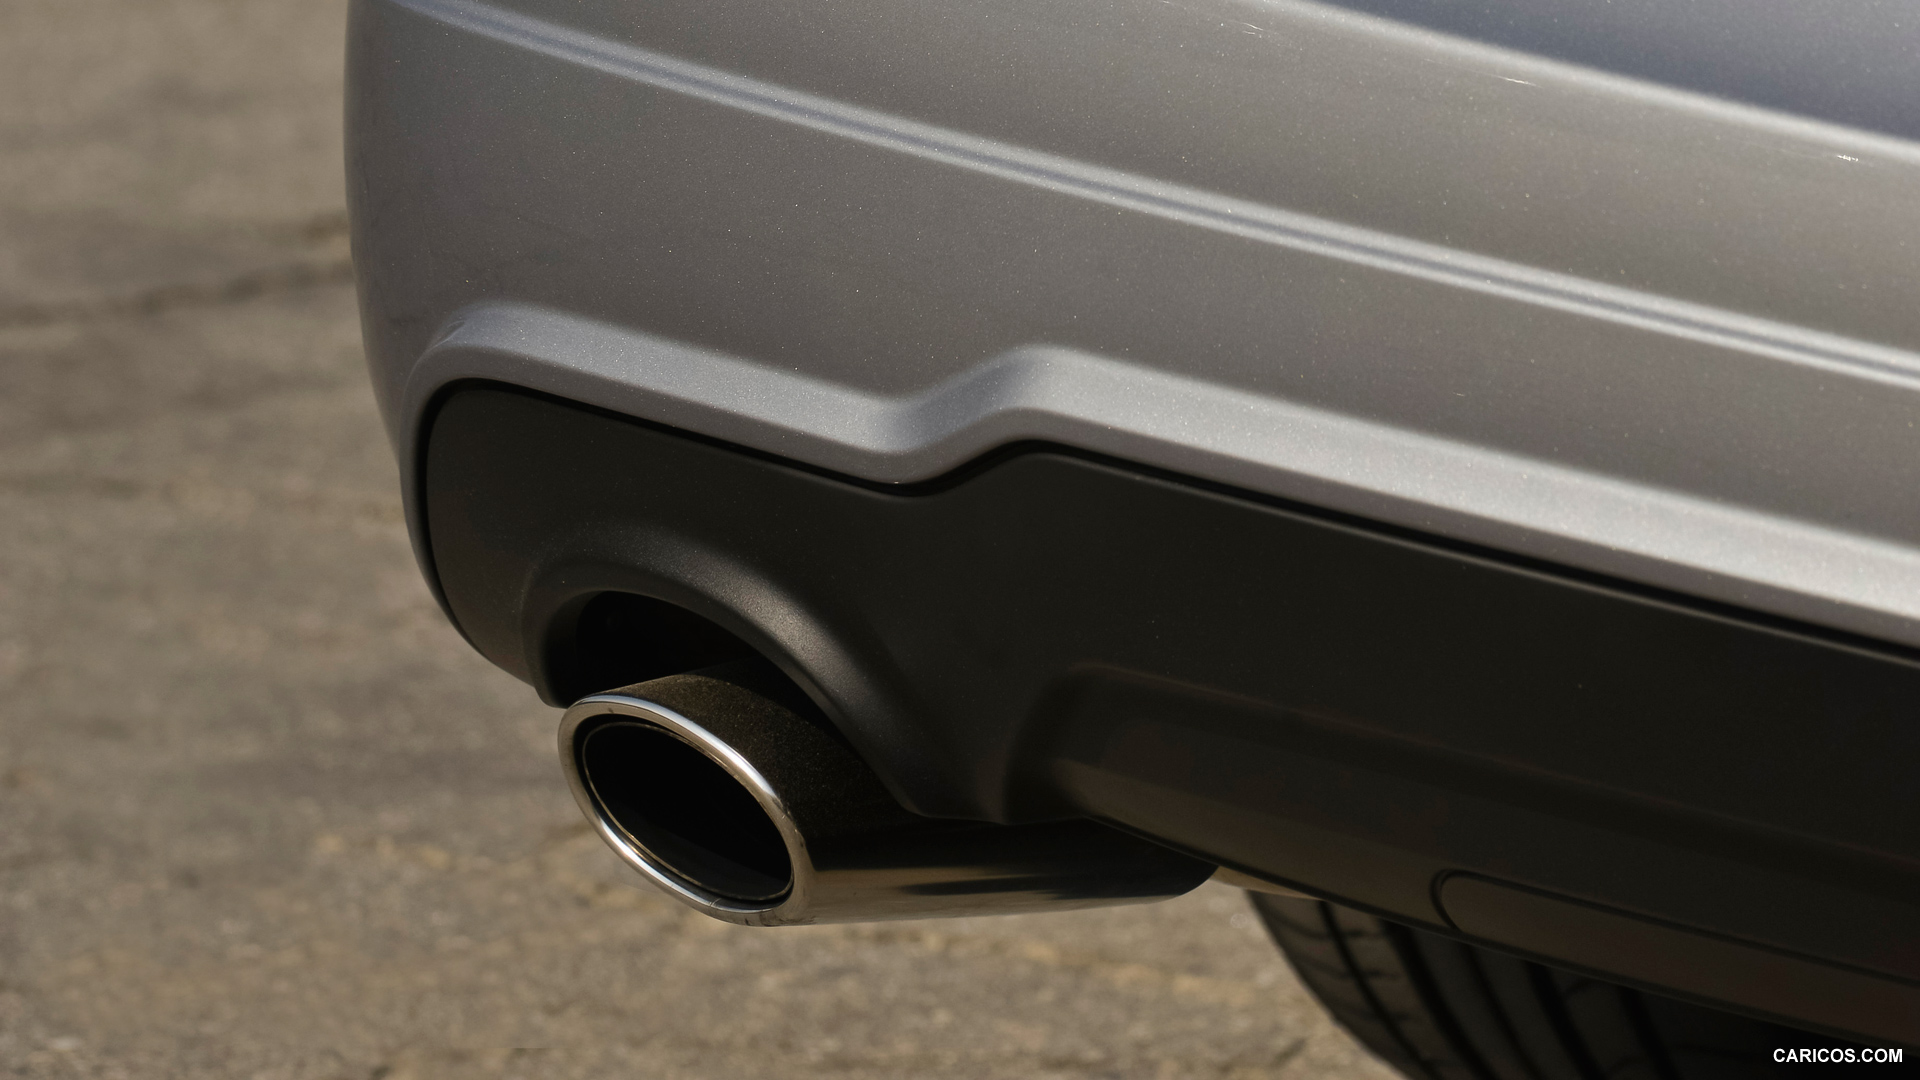 Mercedes-Benz C250 Coupe (2013)  - Exhaust, #75 of 86